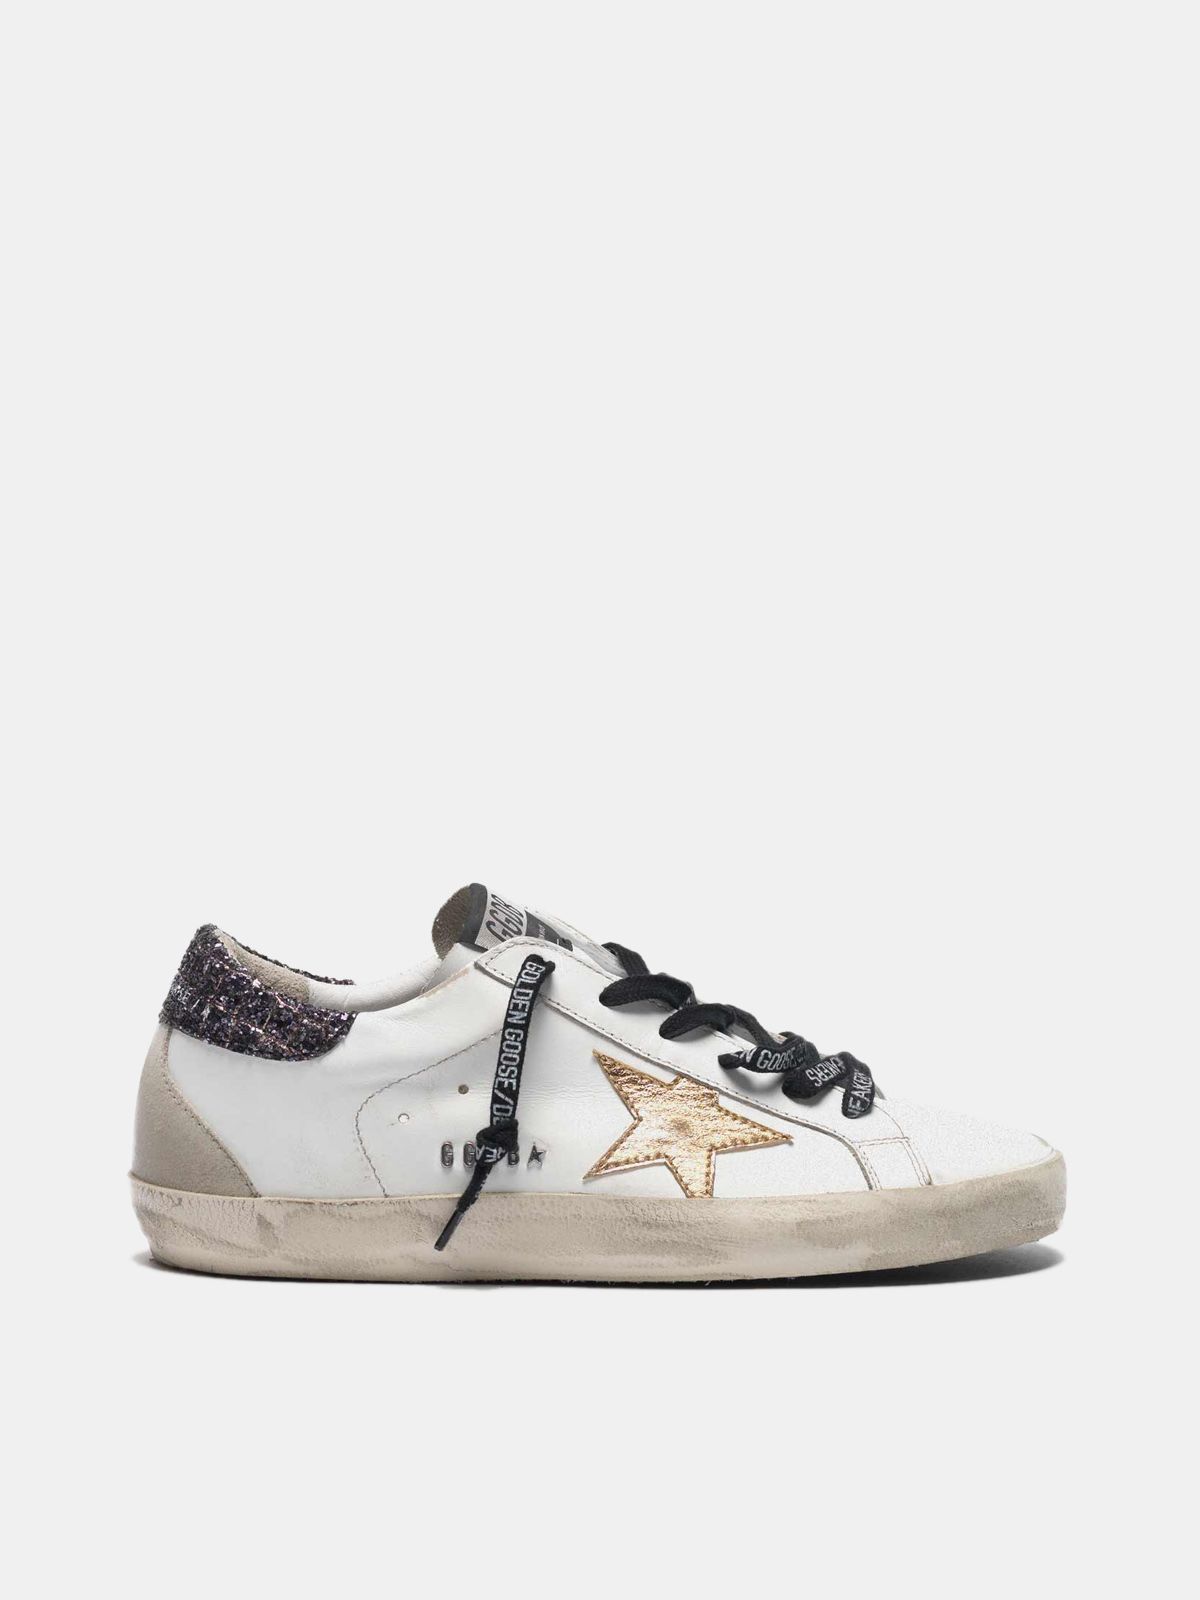 Sneakers Uomo Golden Goose Super-Star sneakers with gold star and glittery heel tab